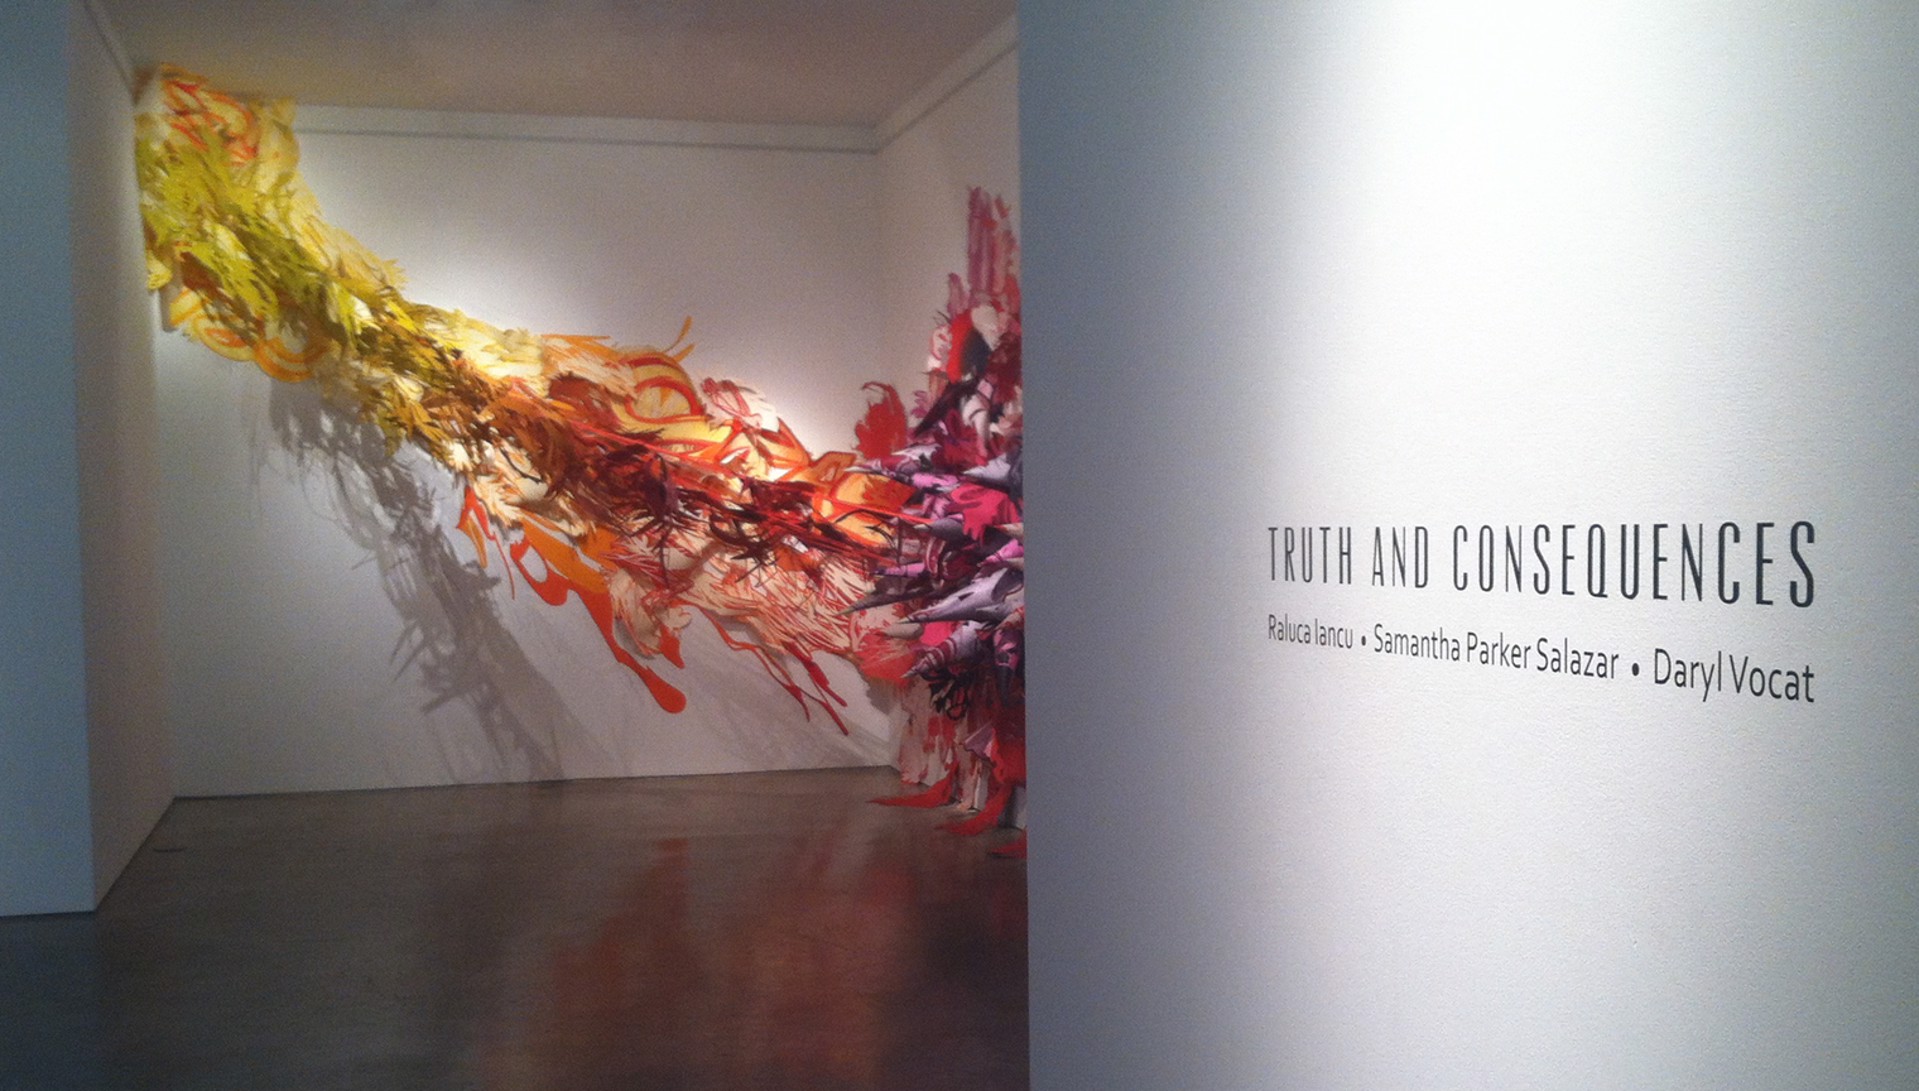 Installation: Truth and Consequences by Samantha Parker Salazar